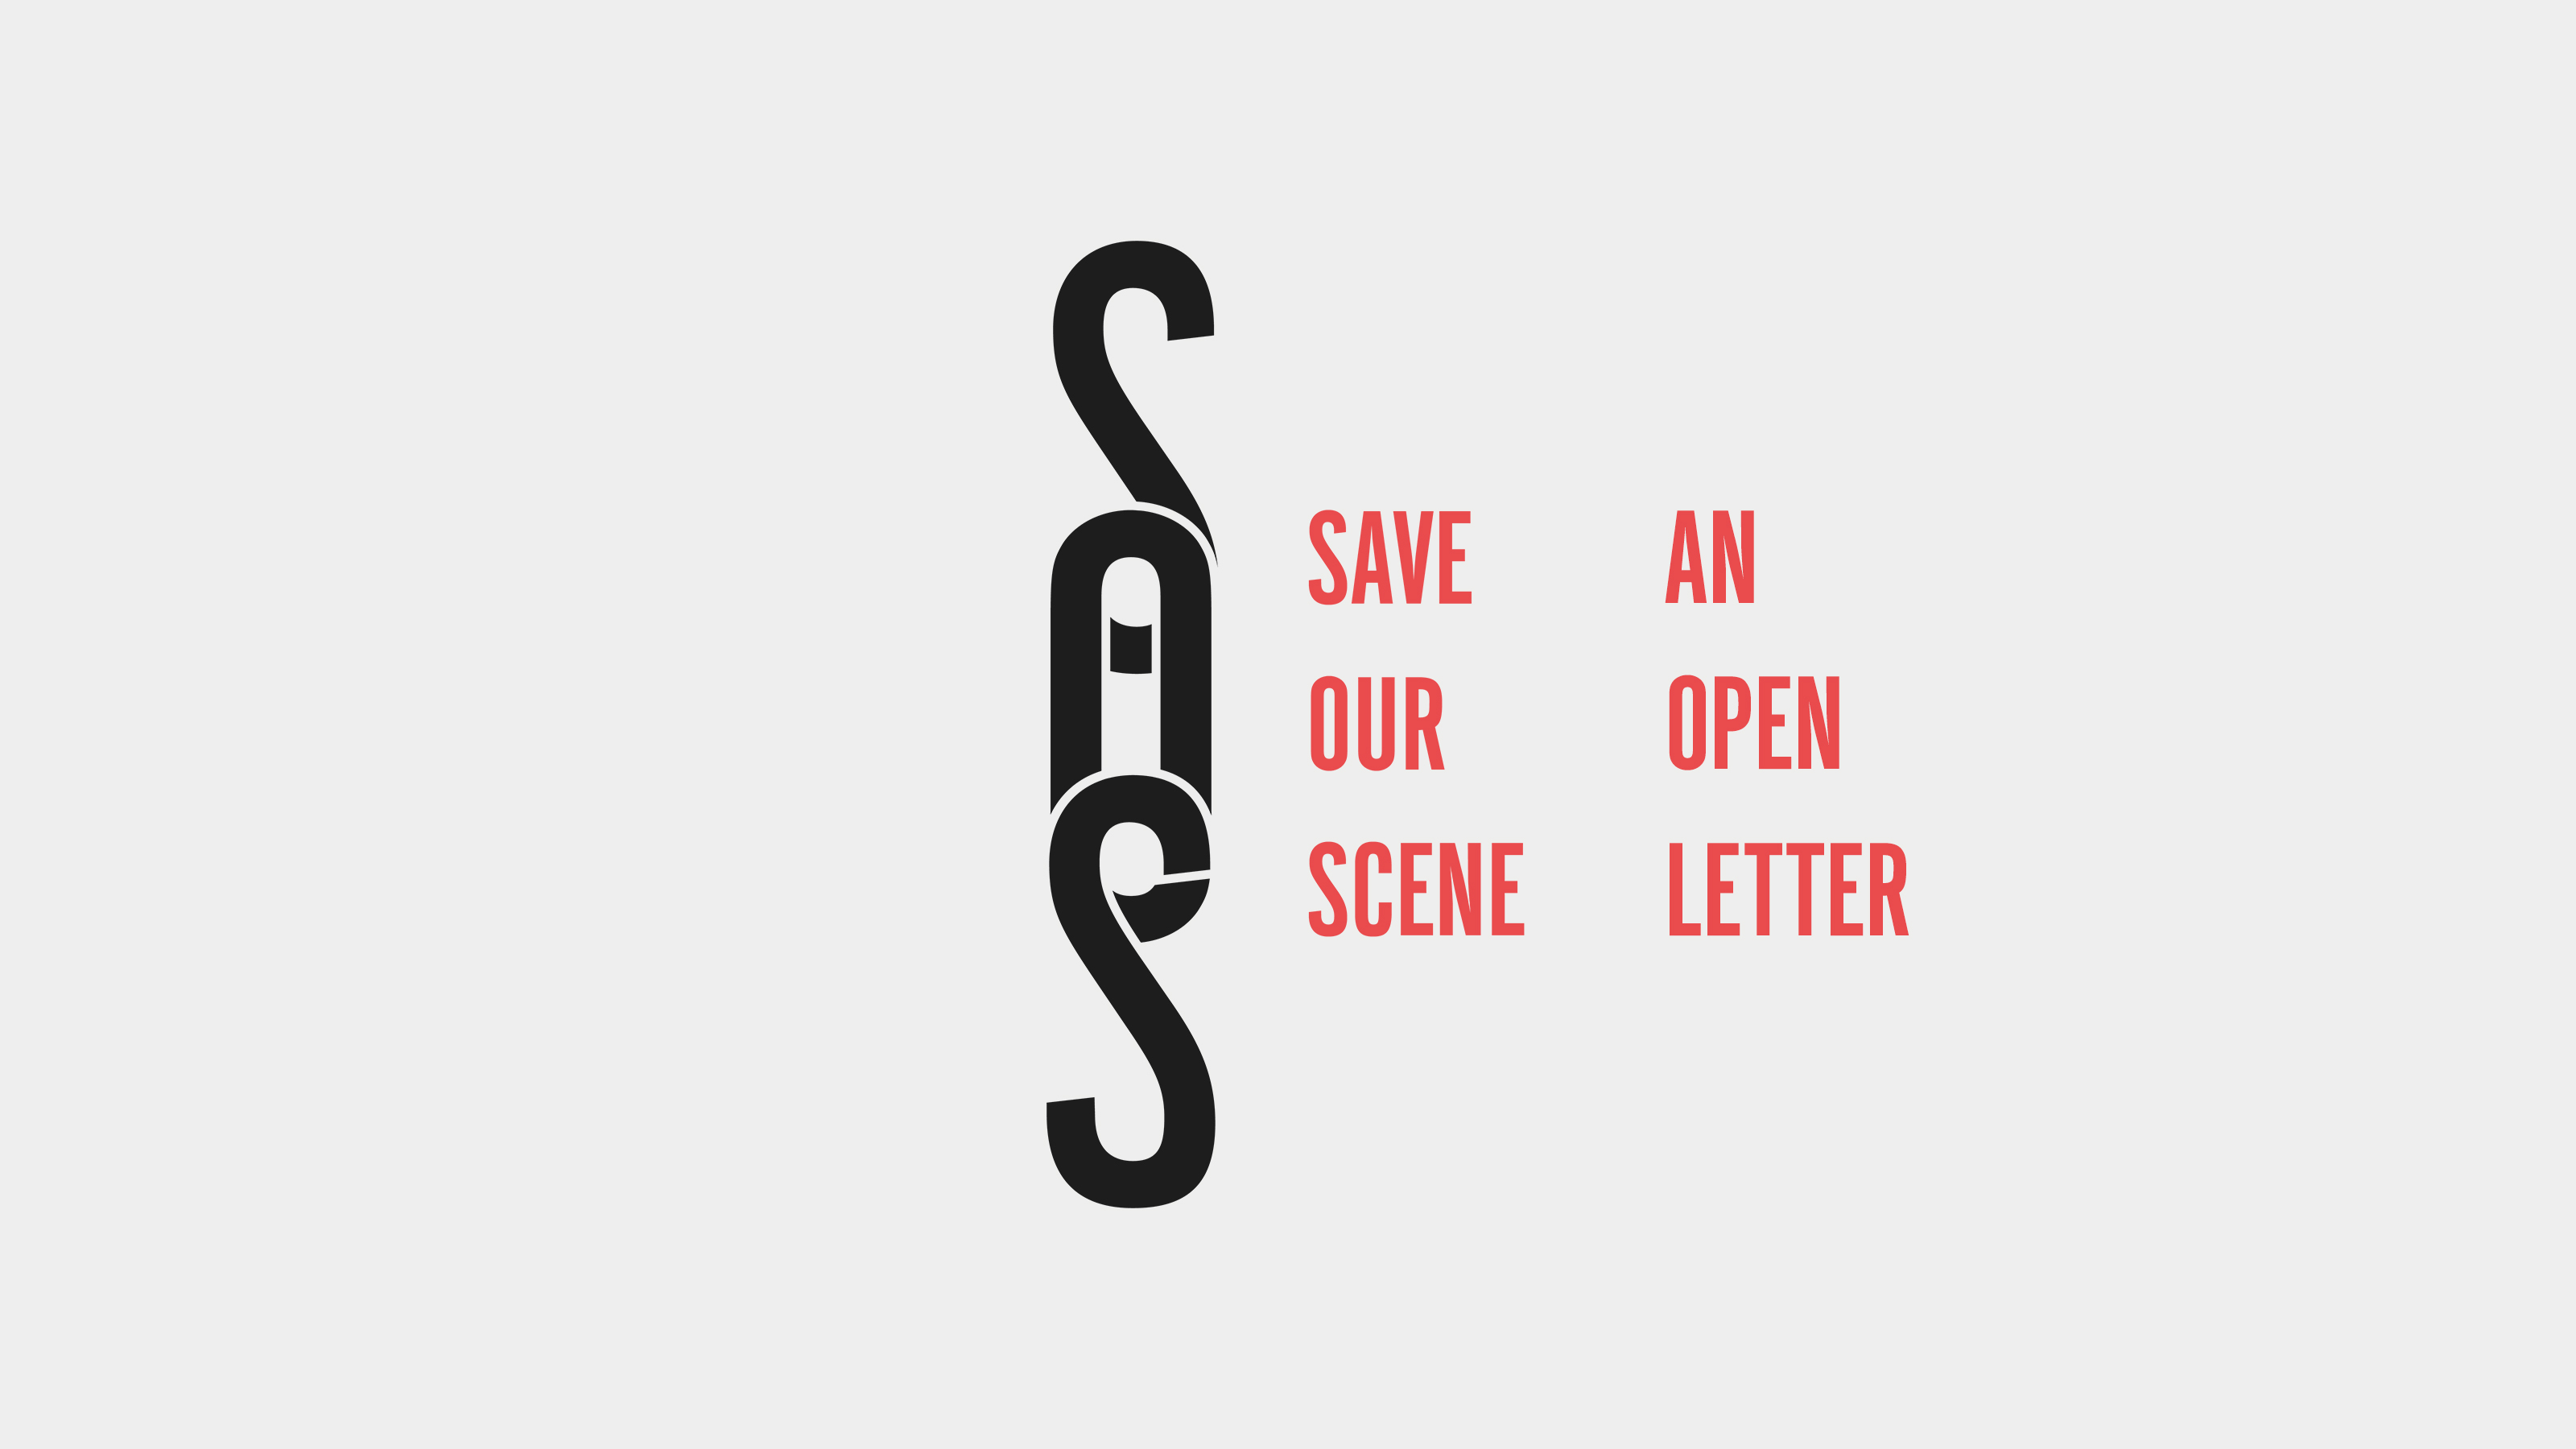 Ra Save Our Scene An Open Letter